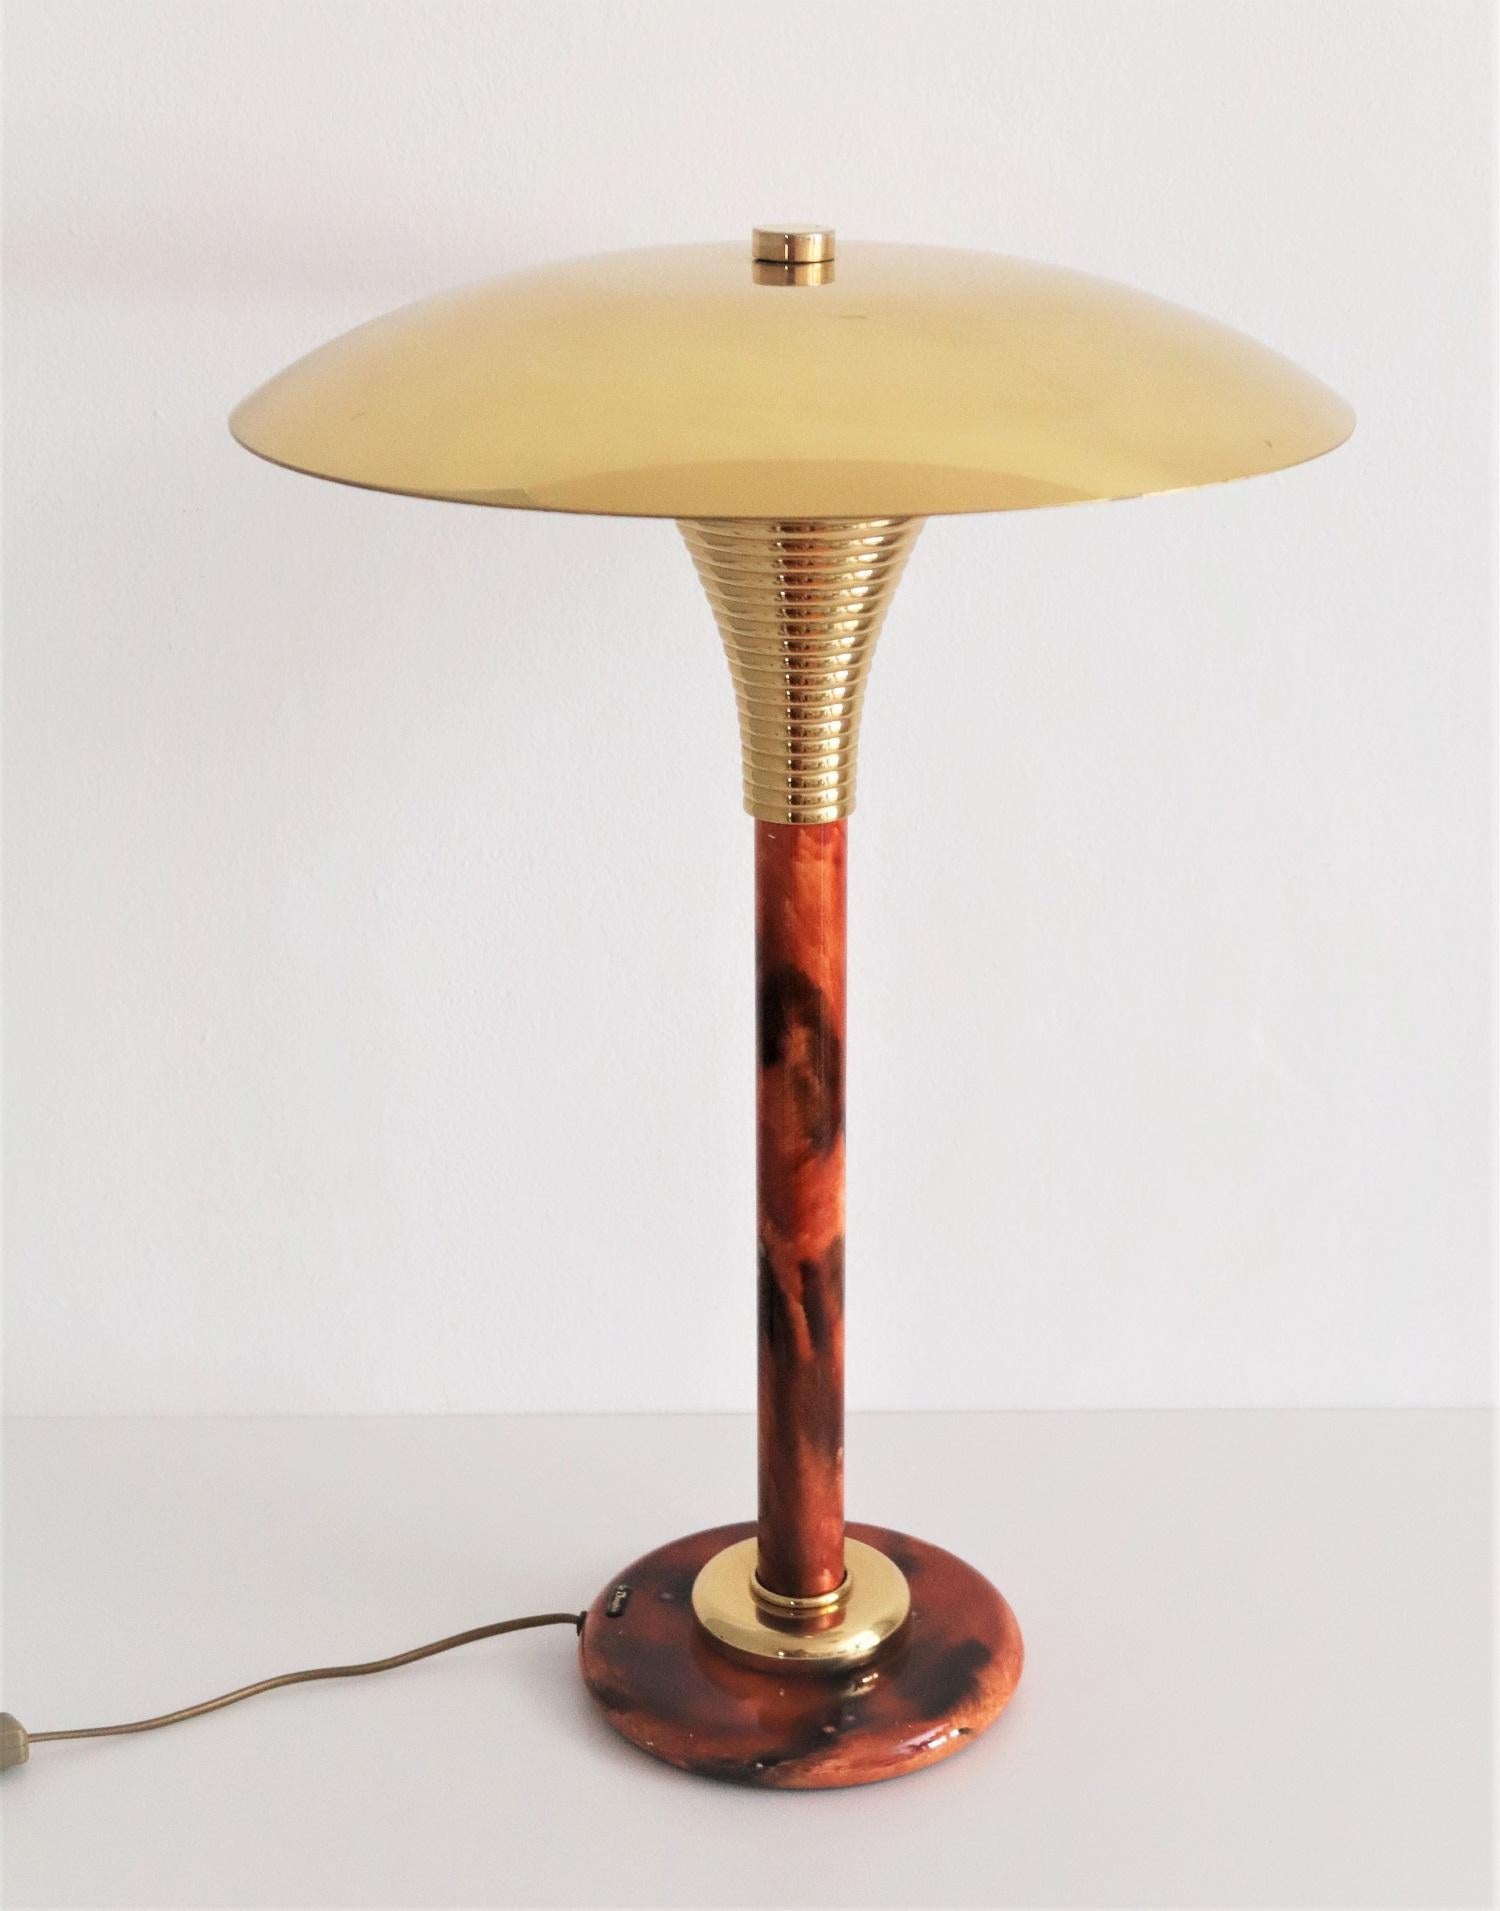 High desk or table lamp made of resin and shiny brass by Maison Le Dauphin, France in the 1970s.
The lamp has a shiny brass lamps top plate with brass screw and under the plate nice brass details.
The lamp's base is made of metal.
Signed with 